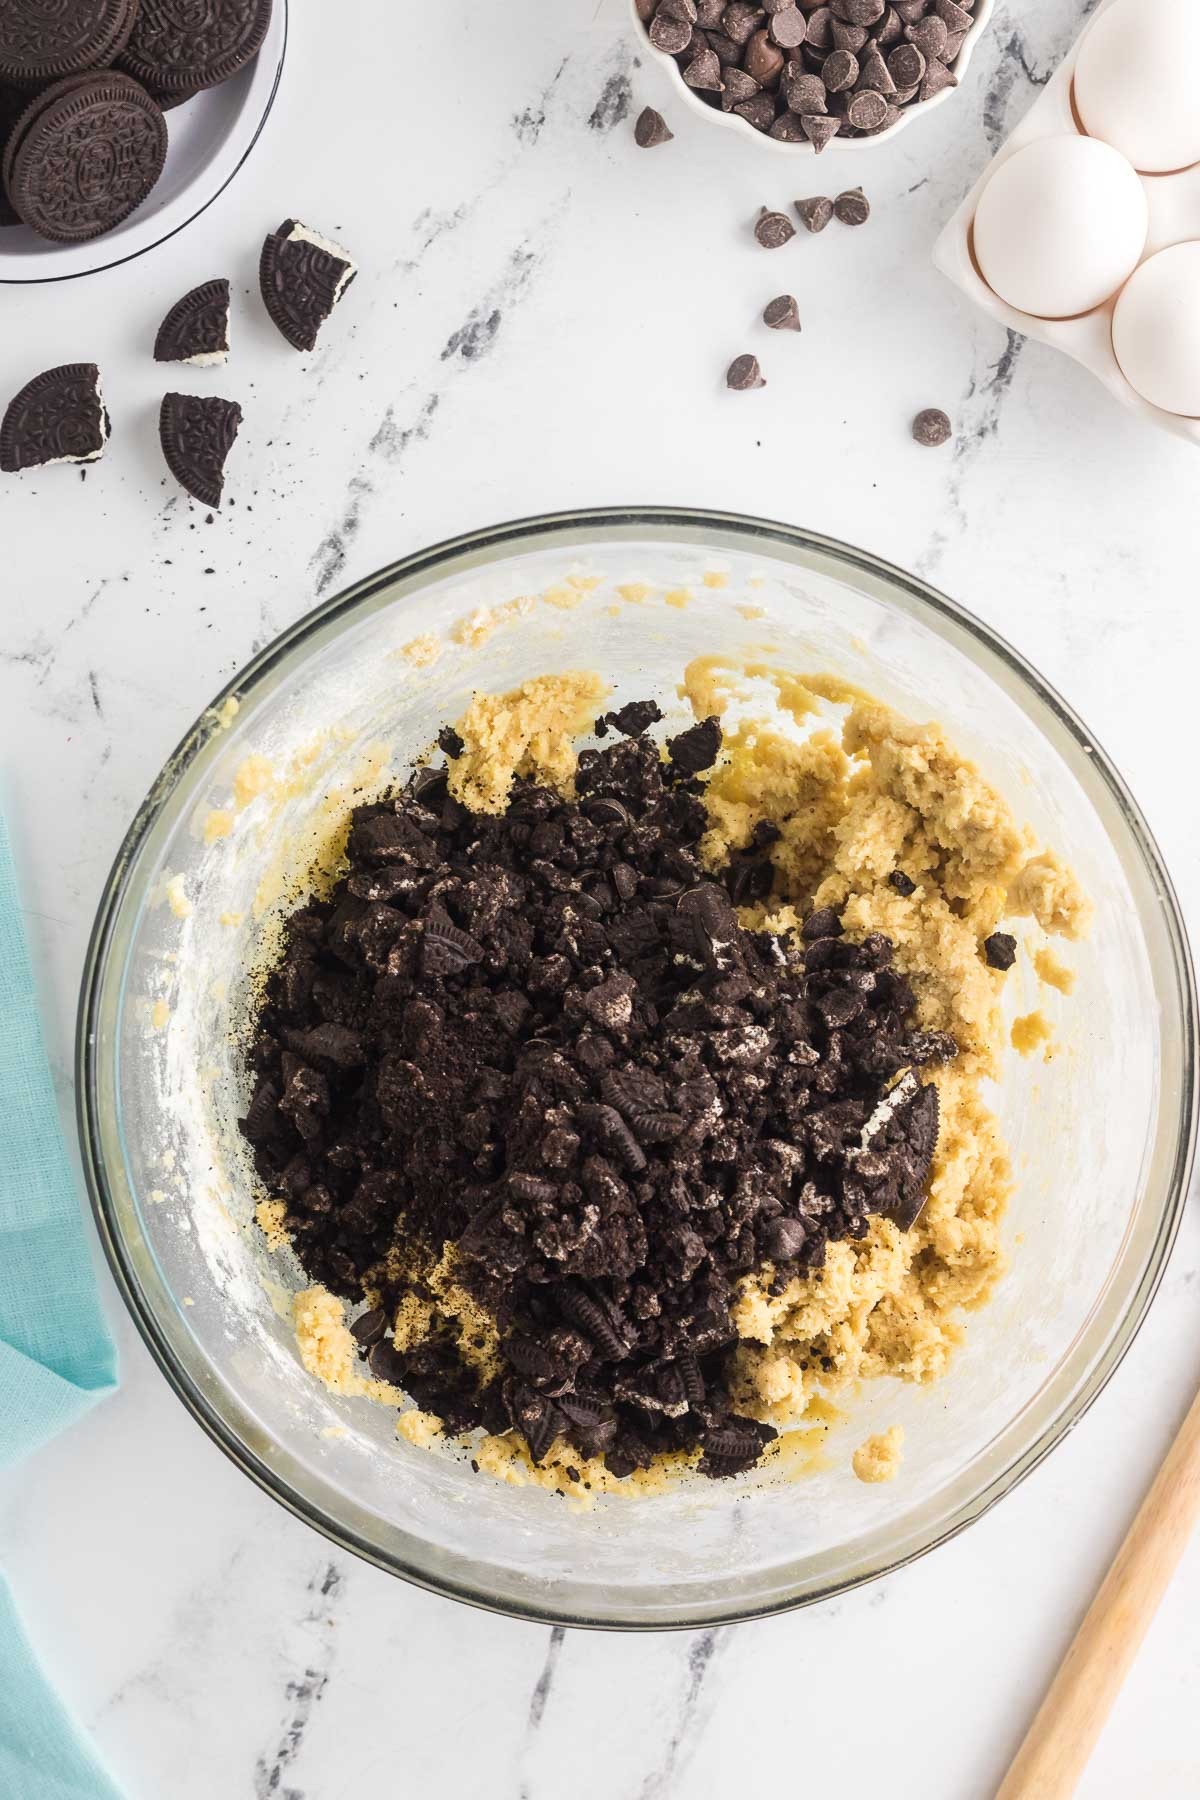 Oreo crumbs in bowl of cookie dough